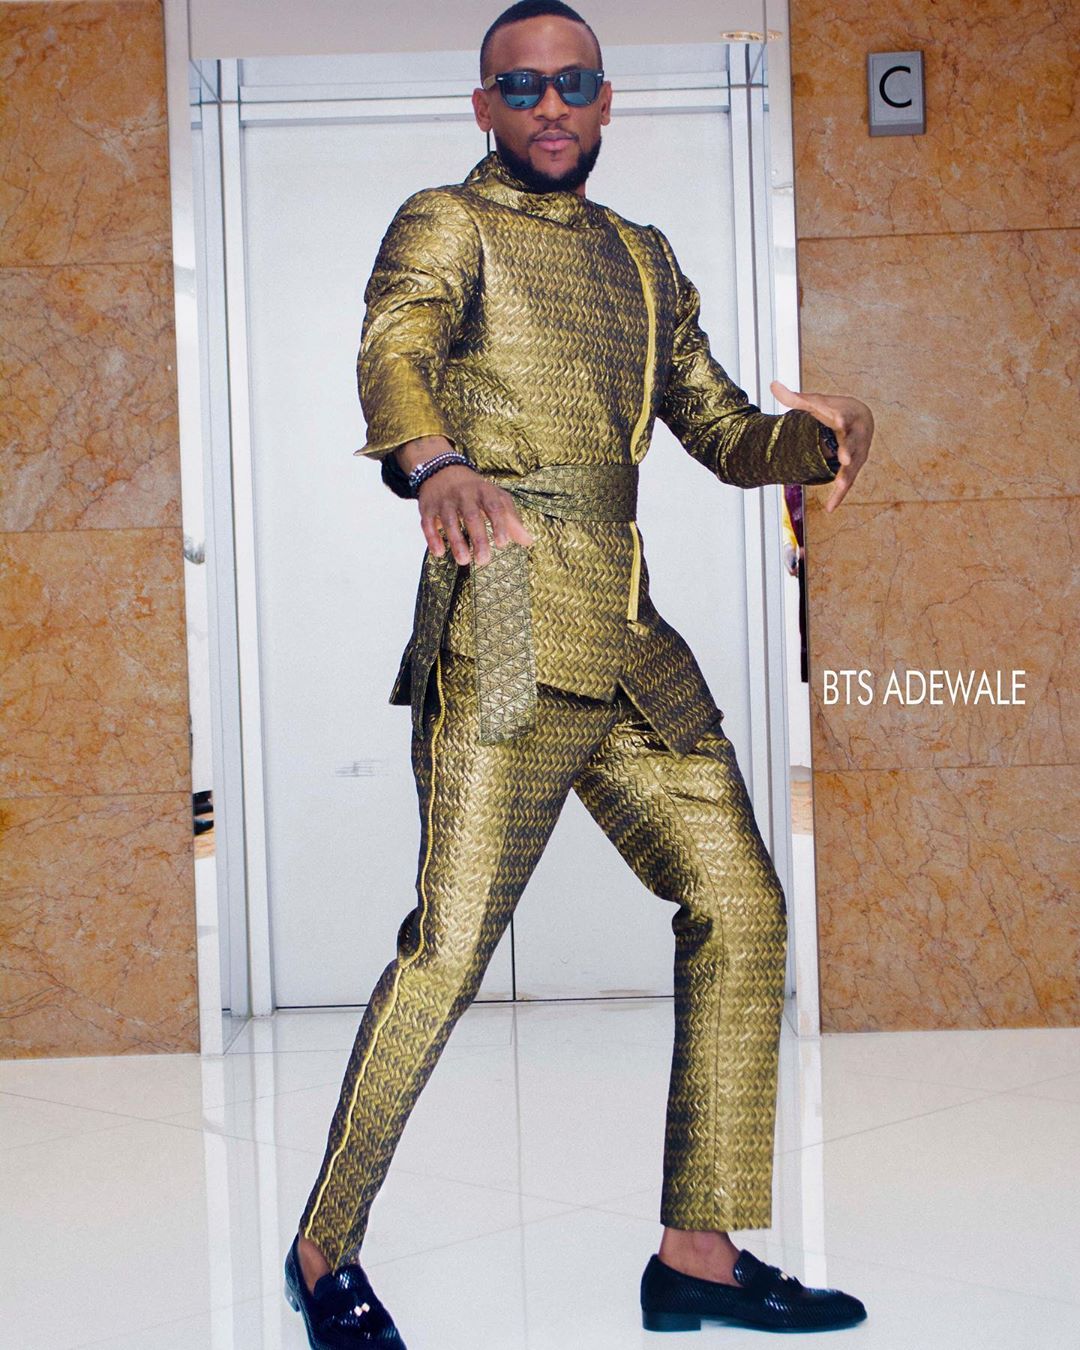 Omashola brought his A-game in a strapped suit [Credit: Omashola Kola Oburoh]